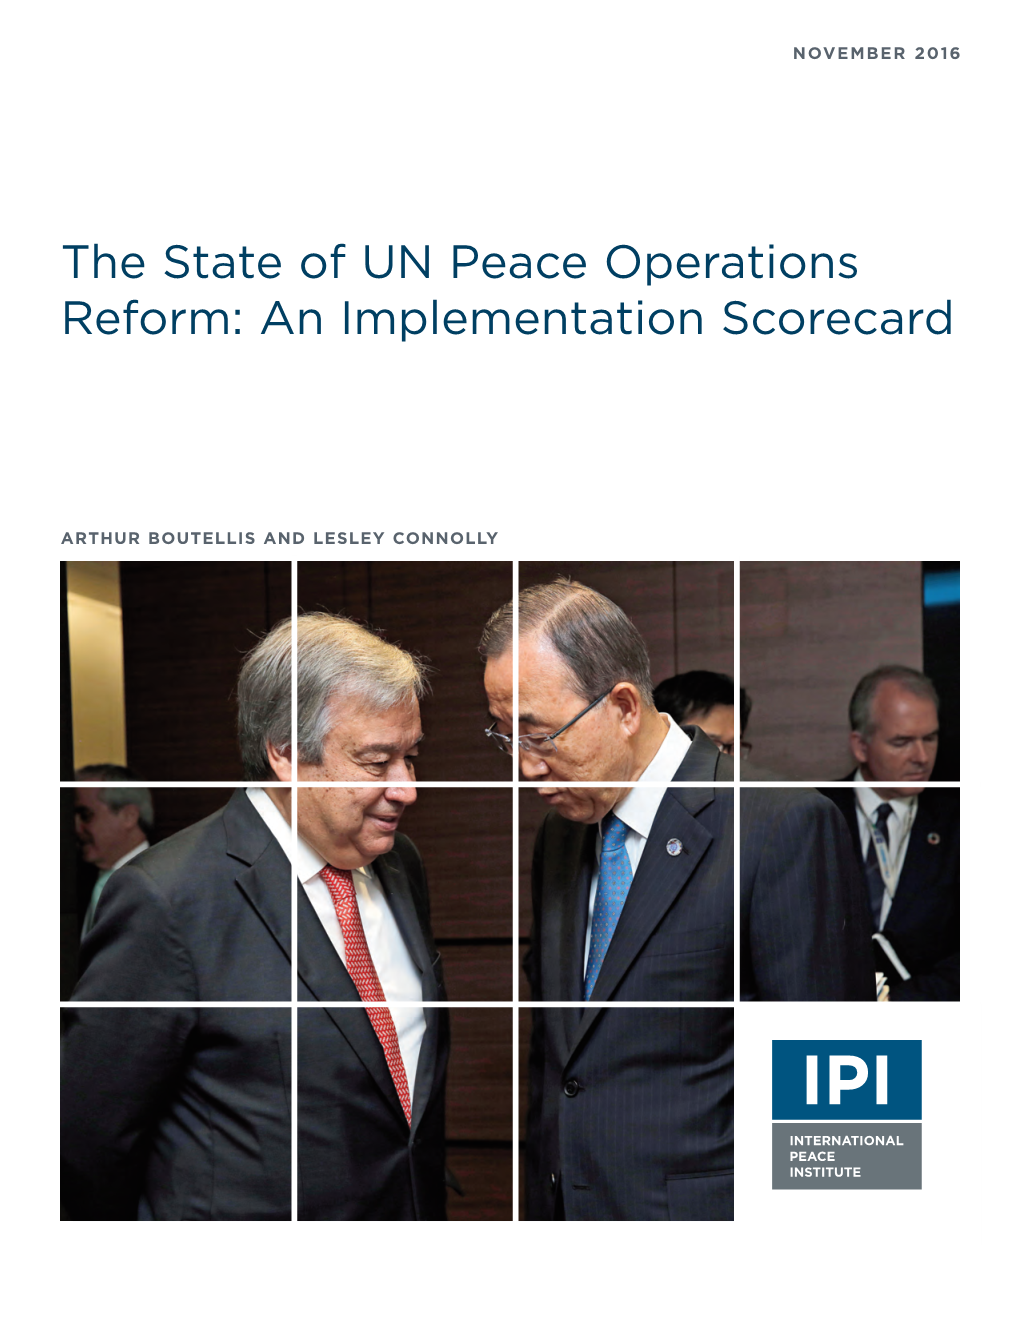 The State of UN Peace Operations Reform: an Implementation Scorecard